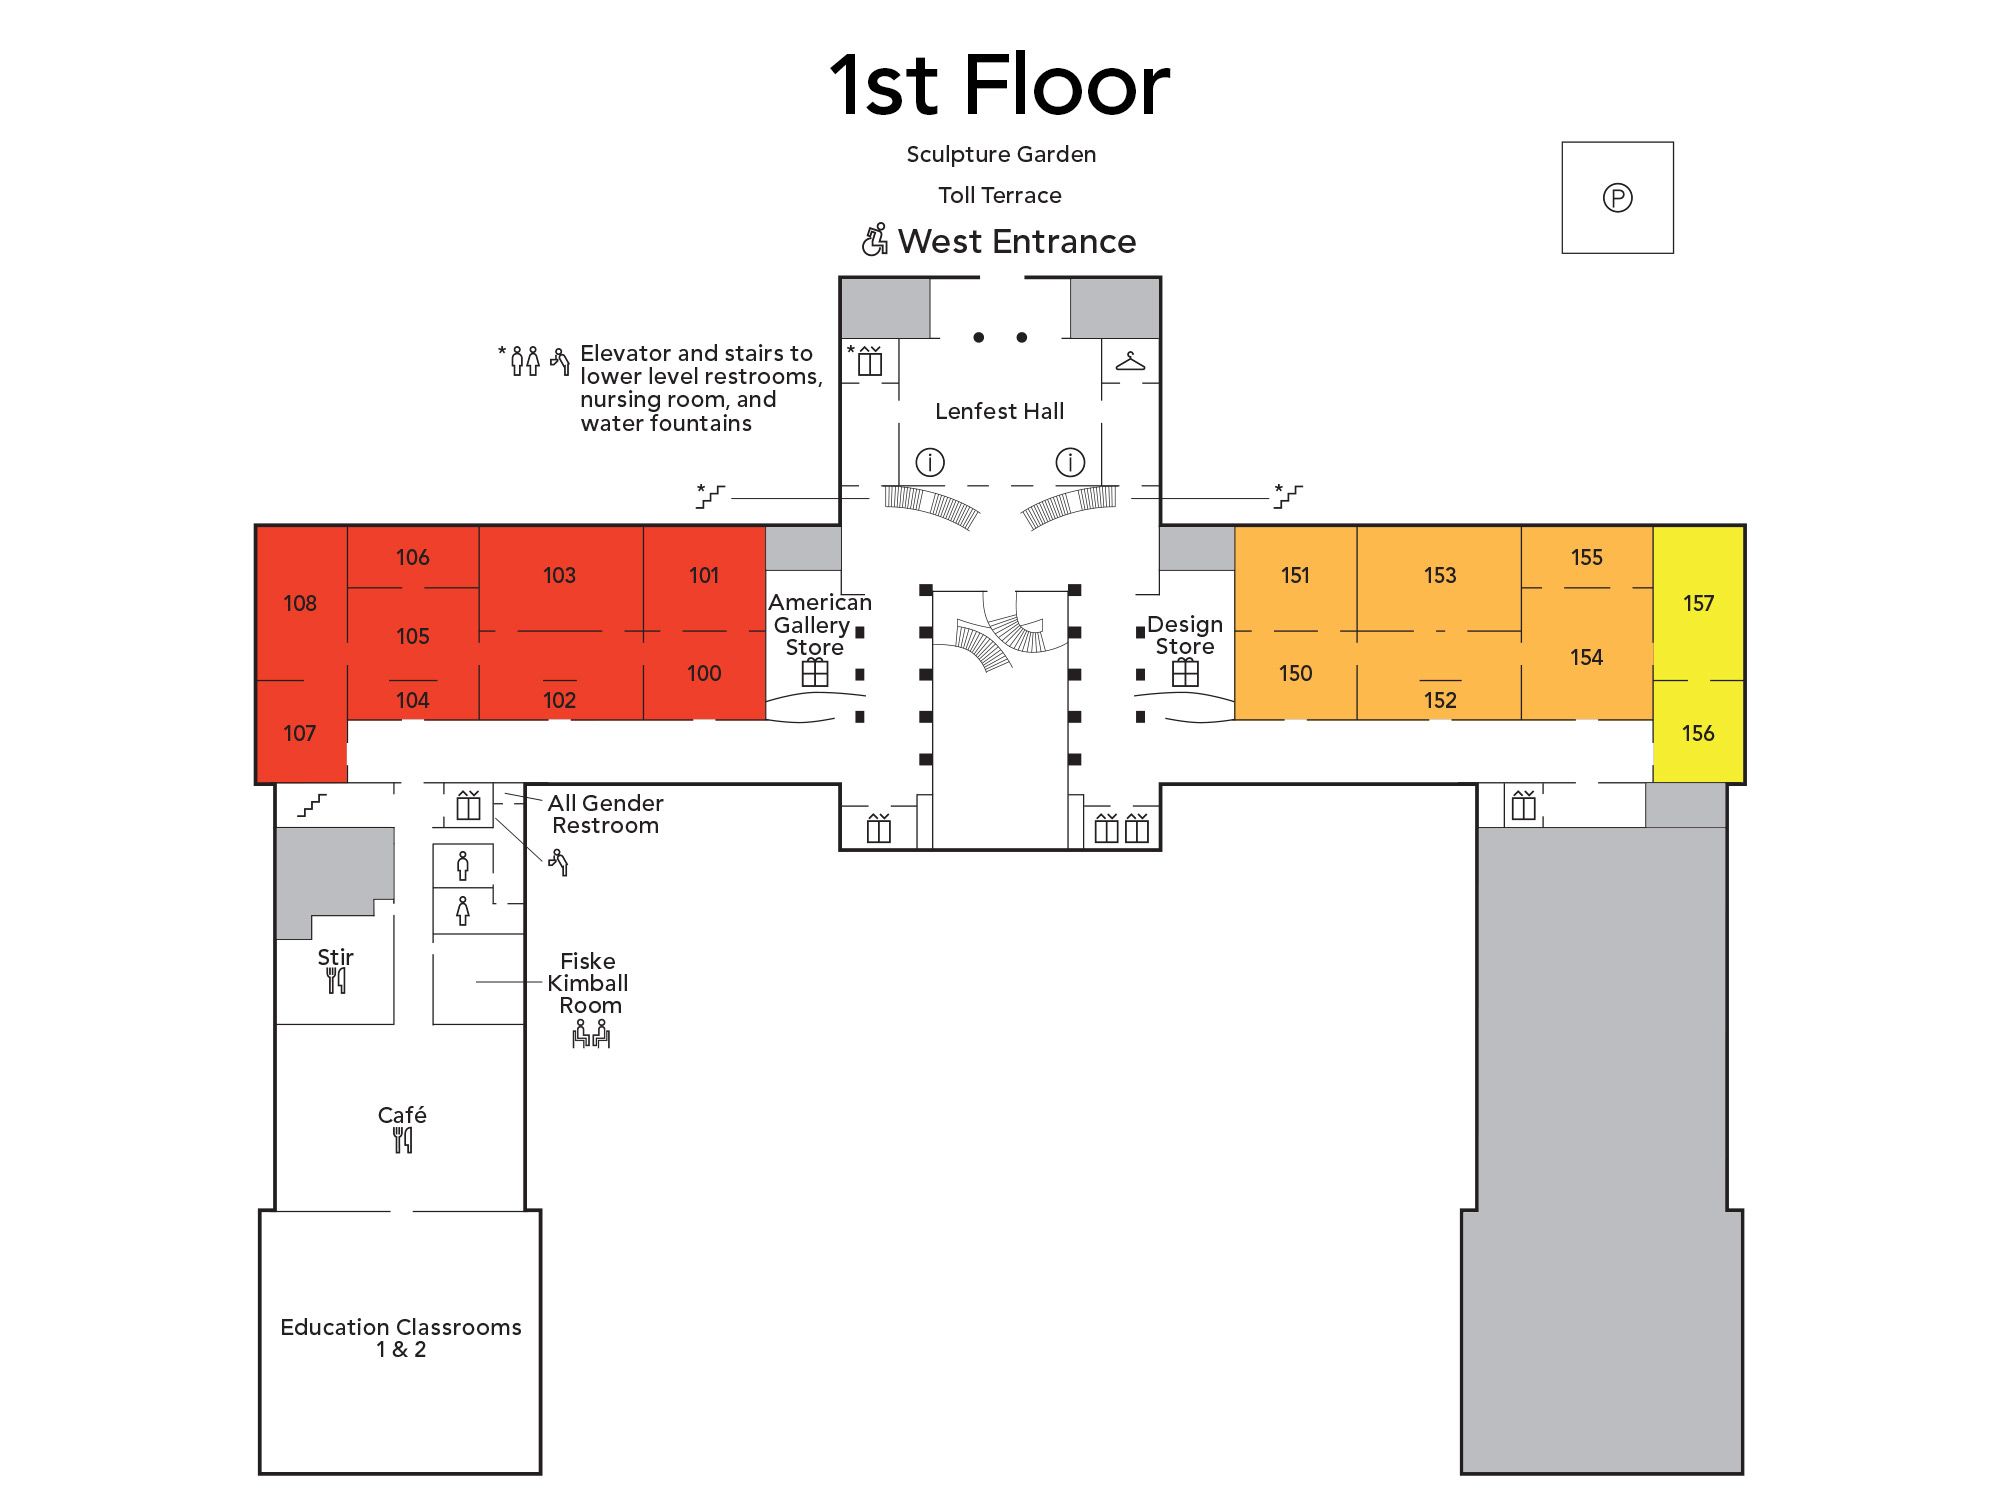 Map of main building first floor